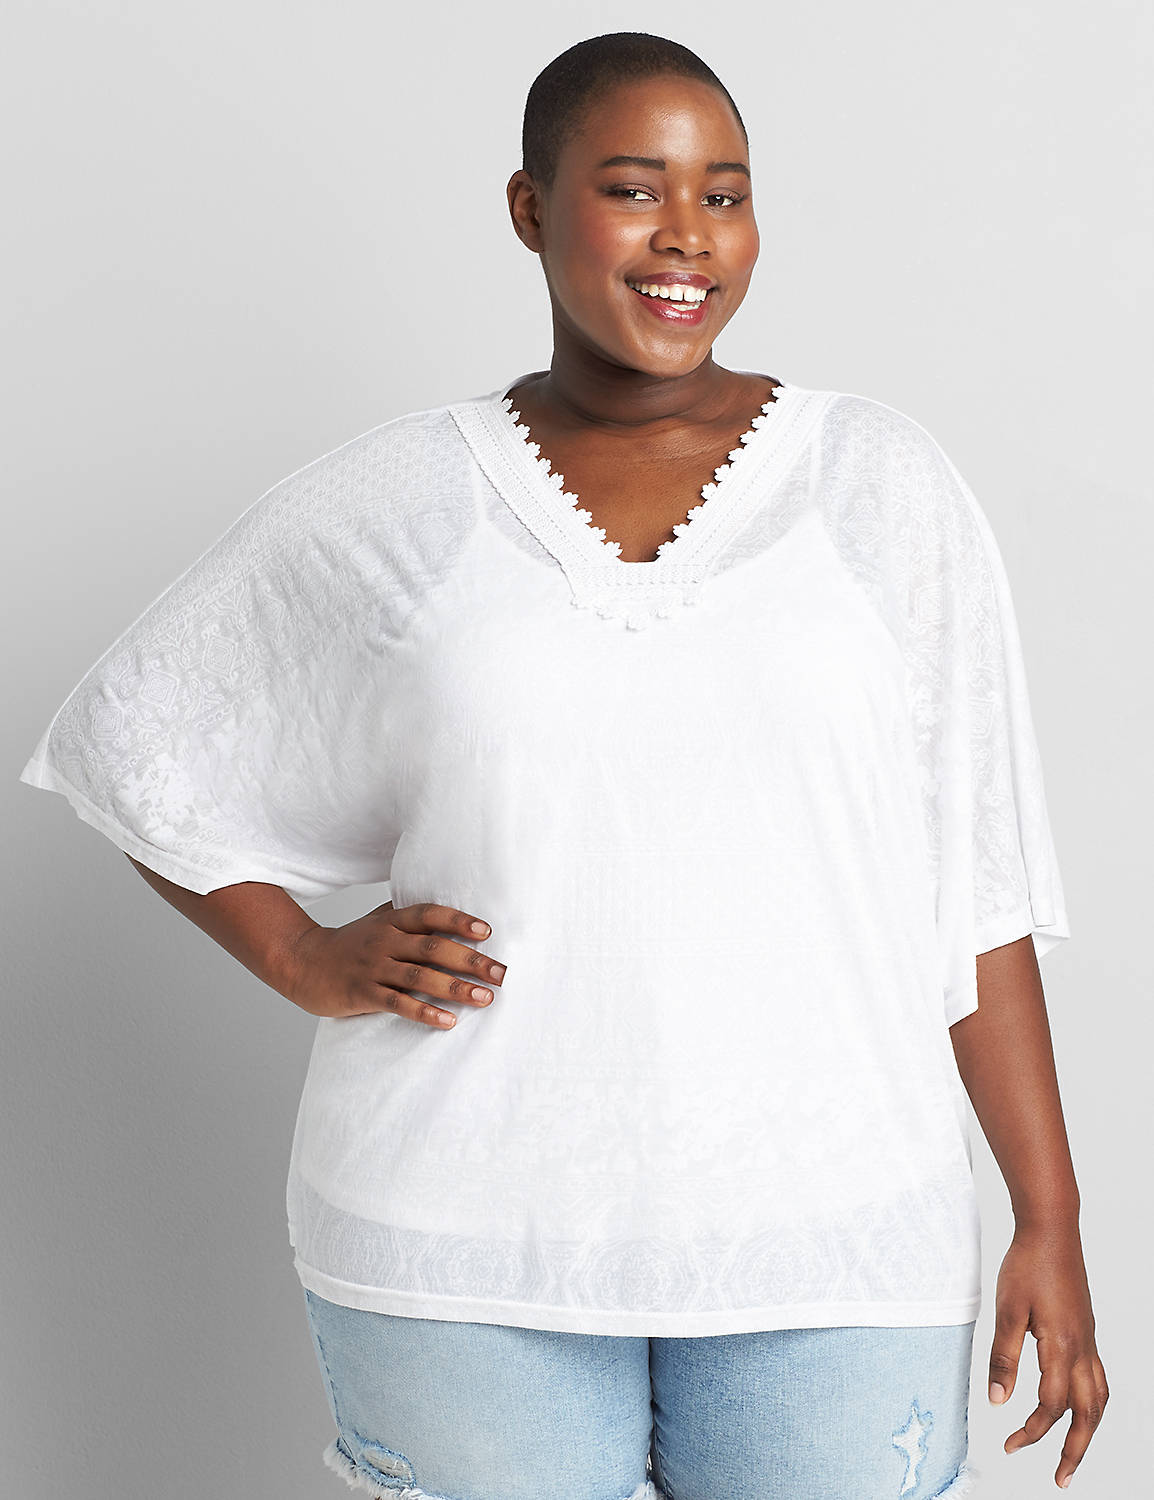 Elbow Length Kimono Sleeve VNeck Domlen In Burnout Fabric With Cami 1119629:Ascena White:14/16 Product Image 1